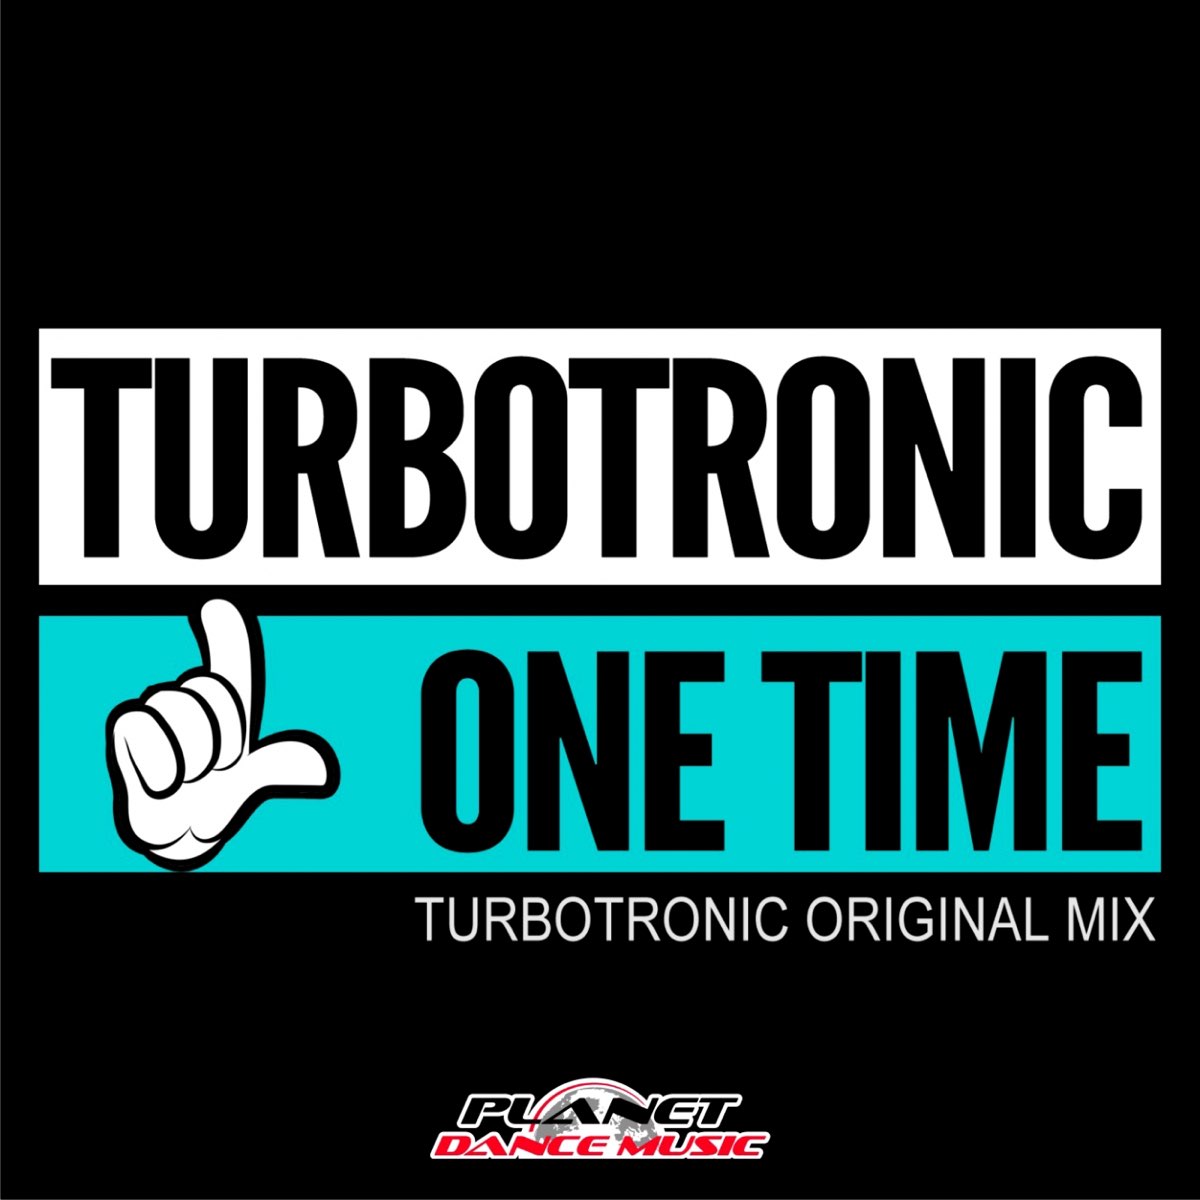 First timers. Турботроник. Turbotronic Showtime. Turbotronic do it (Extended Mix). Турботроник 2018.